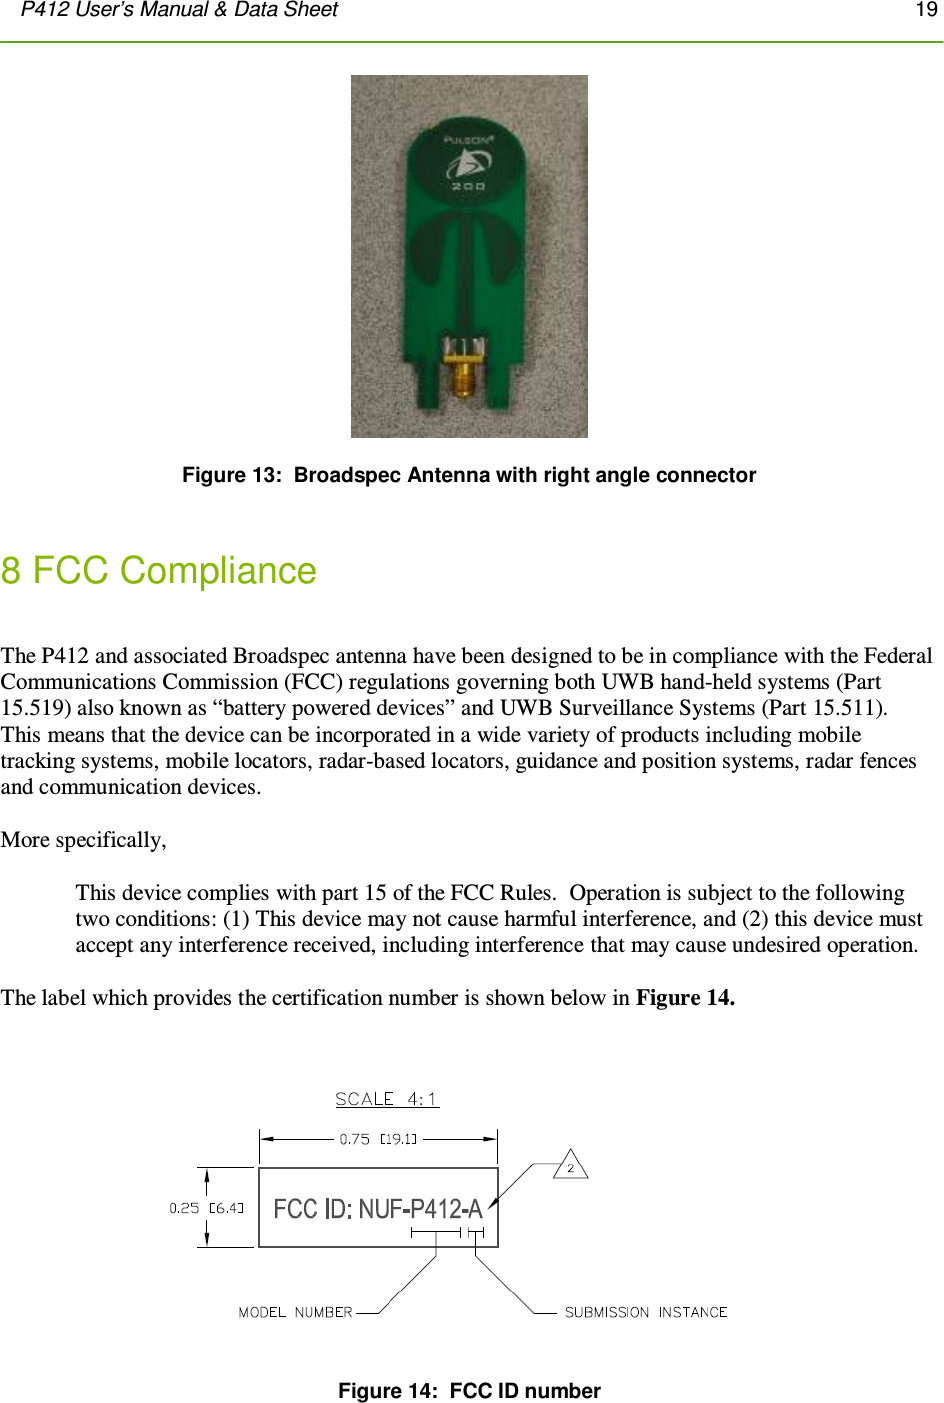 P412 User’s Manual &amp; Data Sheet       19        Figure 13:  Broadspec Antenna with right angle connector   8 FCC Compliance   The P412 and associated Broadspec antenna have been designed to be in compliance with the Federal Communications Commission (FCC) regulations governing both UWB hand-held systems (Part 15.519) also known as “battery powered devices” and UWB Surveillance Systems (Part 15.511).  This means that the device can be incorporated in a wide variety of products including mobile tracking systems, mobile locators, radar-based locators, guidance and position systems, radar fences and communication devices.     More specifically,  This device complies with part 15 of the FCC Rules.  Operation is subject to the following two conditions: (1) This device may not cause harmful interference, and (2) this device must accept any interference received, including interference that may cause undesired operation.  The label which provides the certification number is shown below in Figure 14.    Figure 14:  FCC ID number 